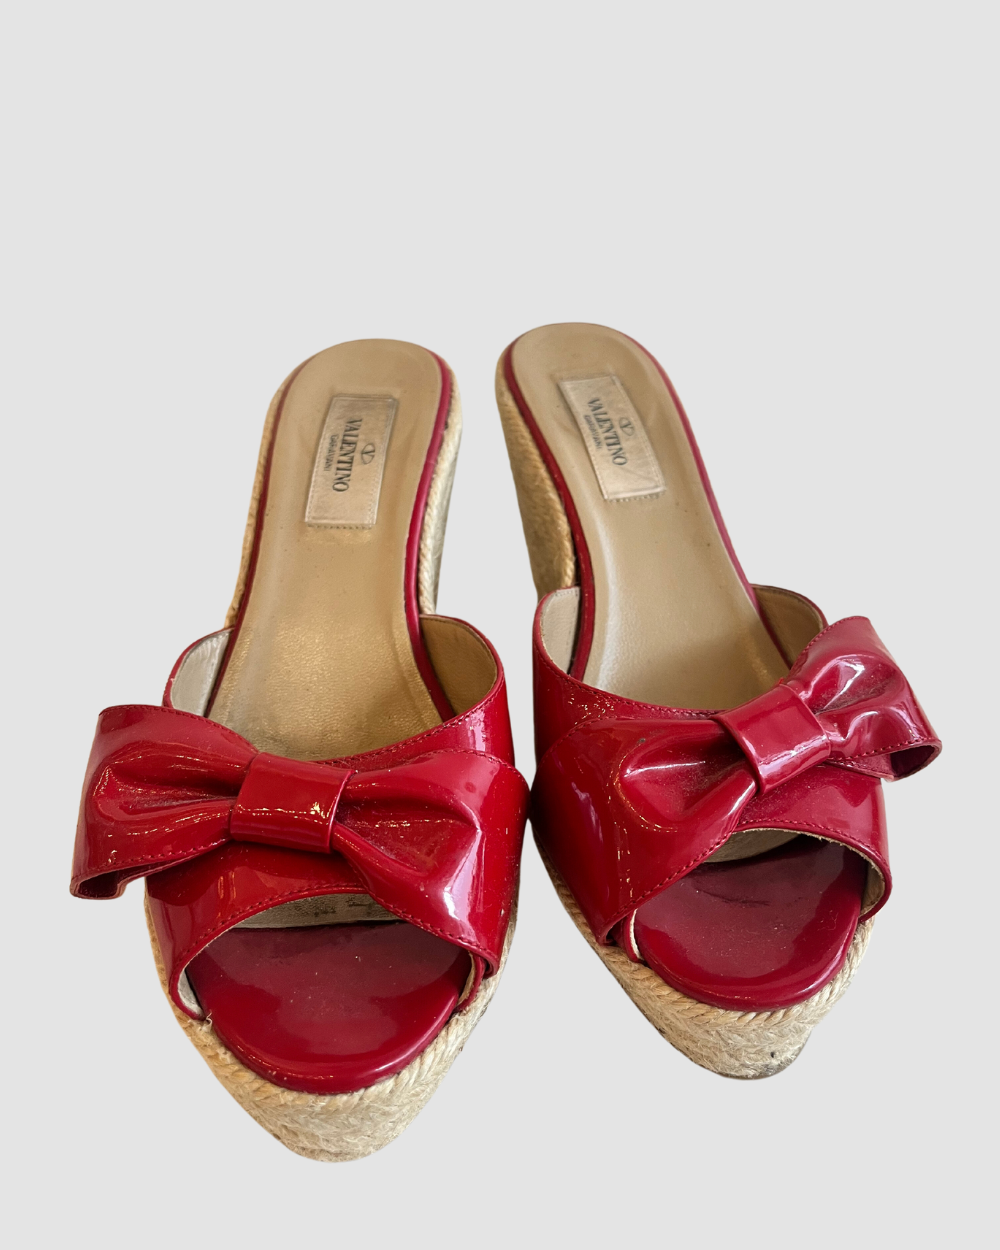 Valentino Red Bow Wedges